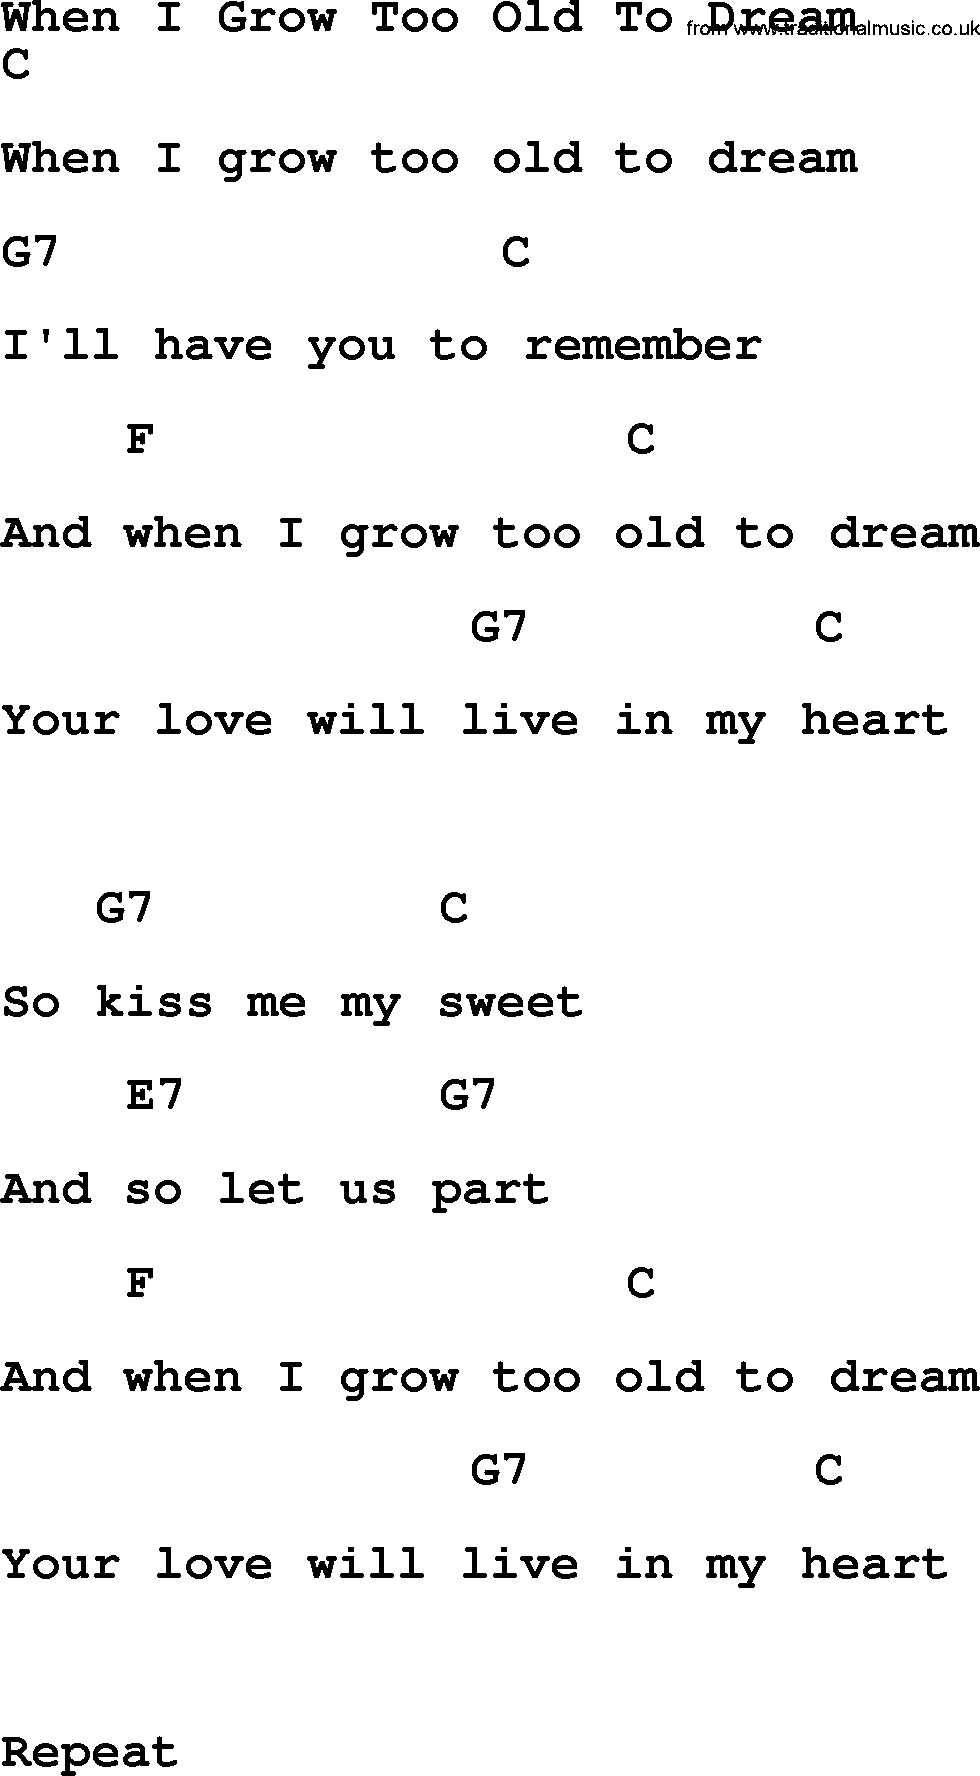 Bluegrass song: When I Grow Too Old To Dream, lyrics and chords